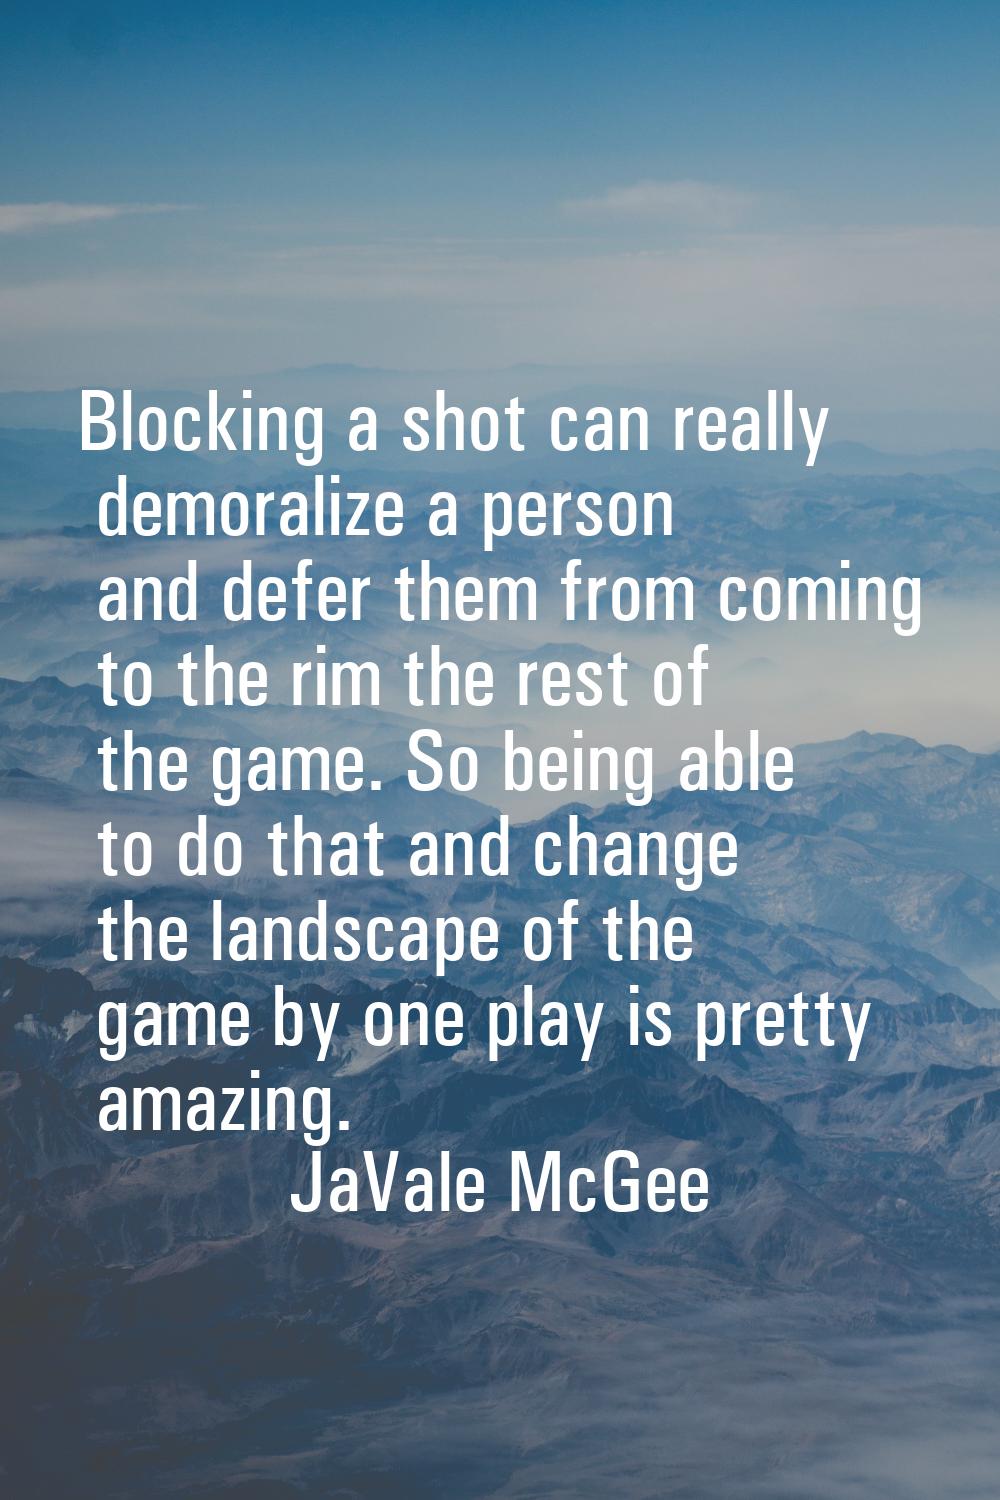 Blocking a shot can really demoralize a person and defer them from coming to the rim the rest of th